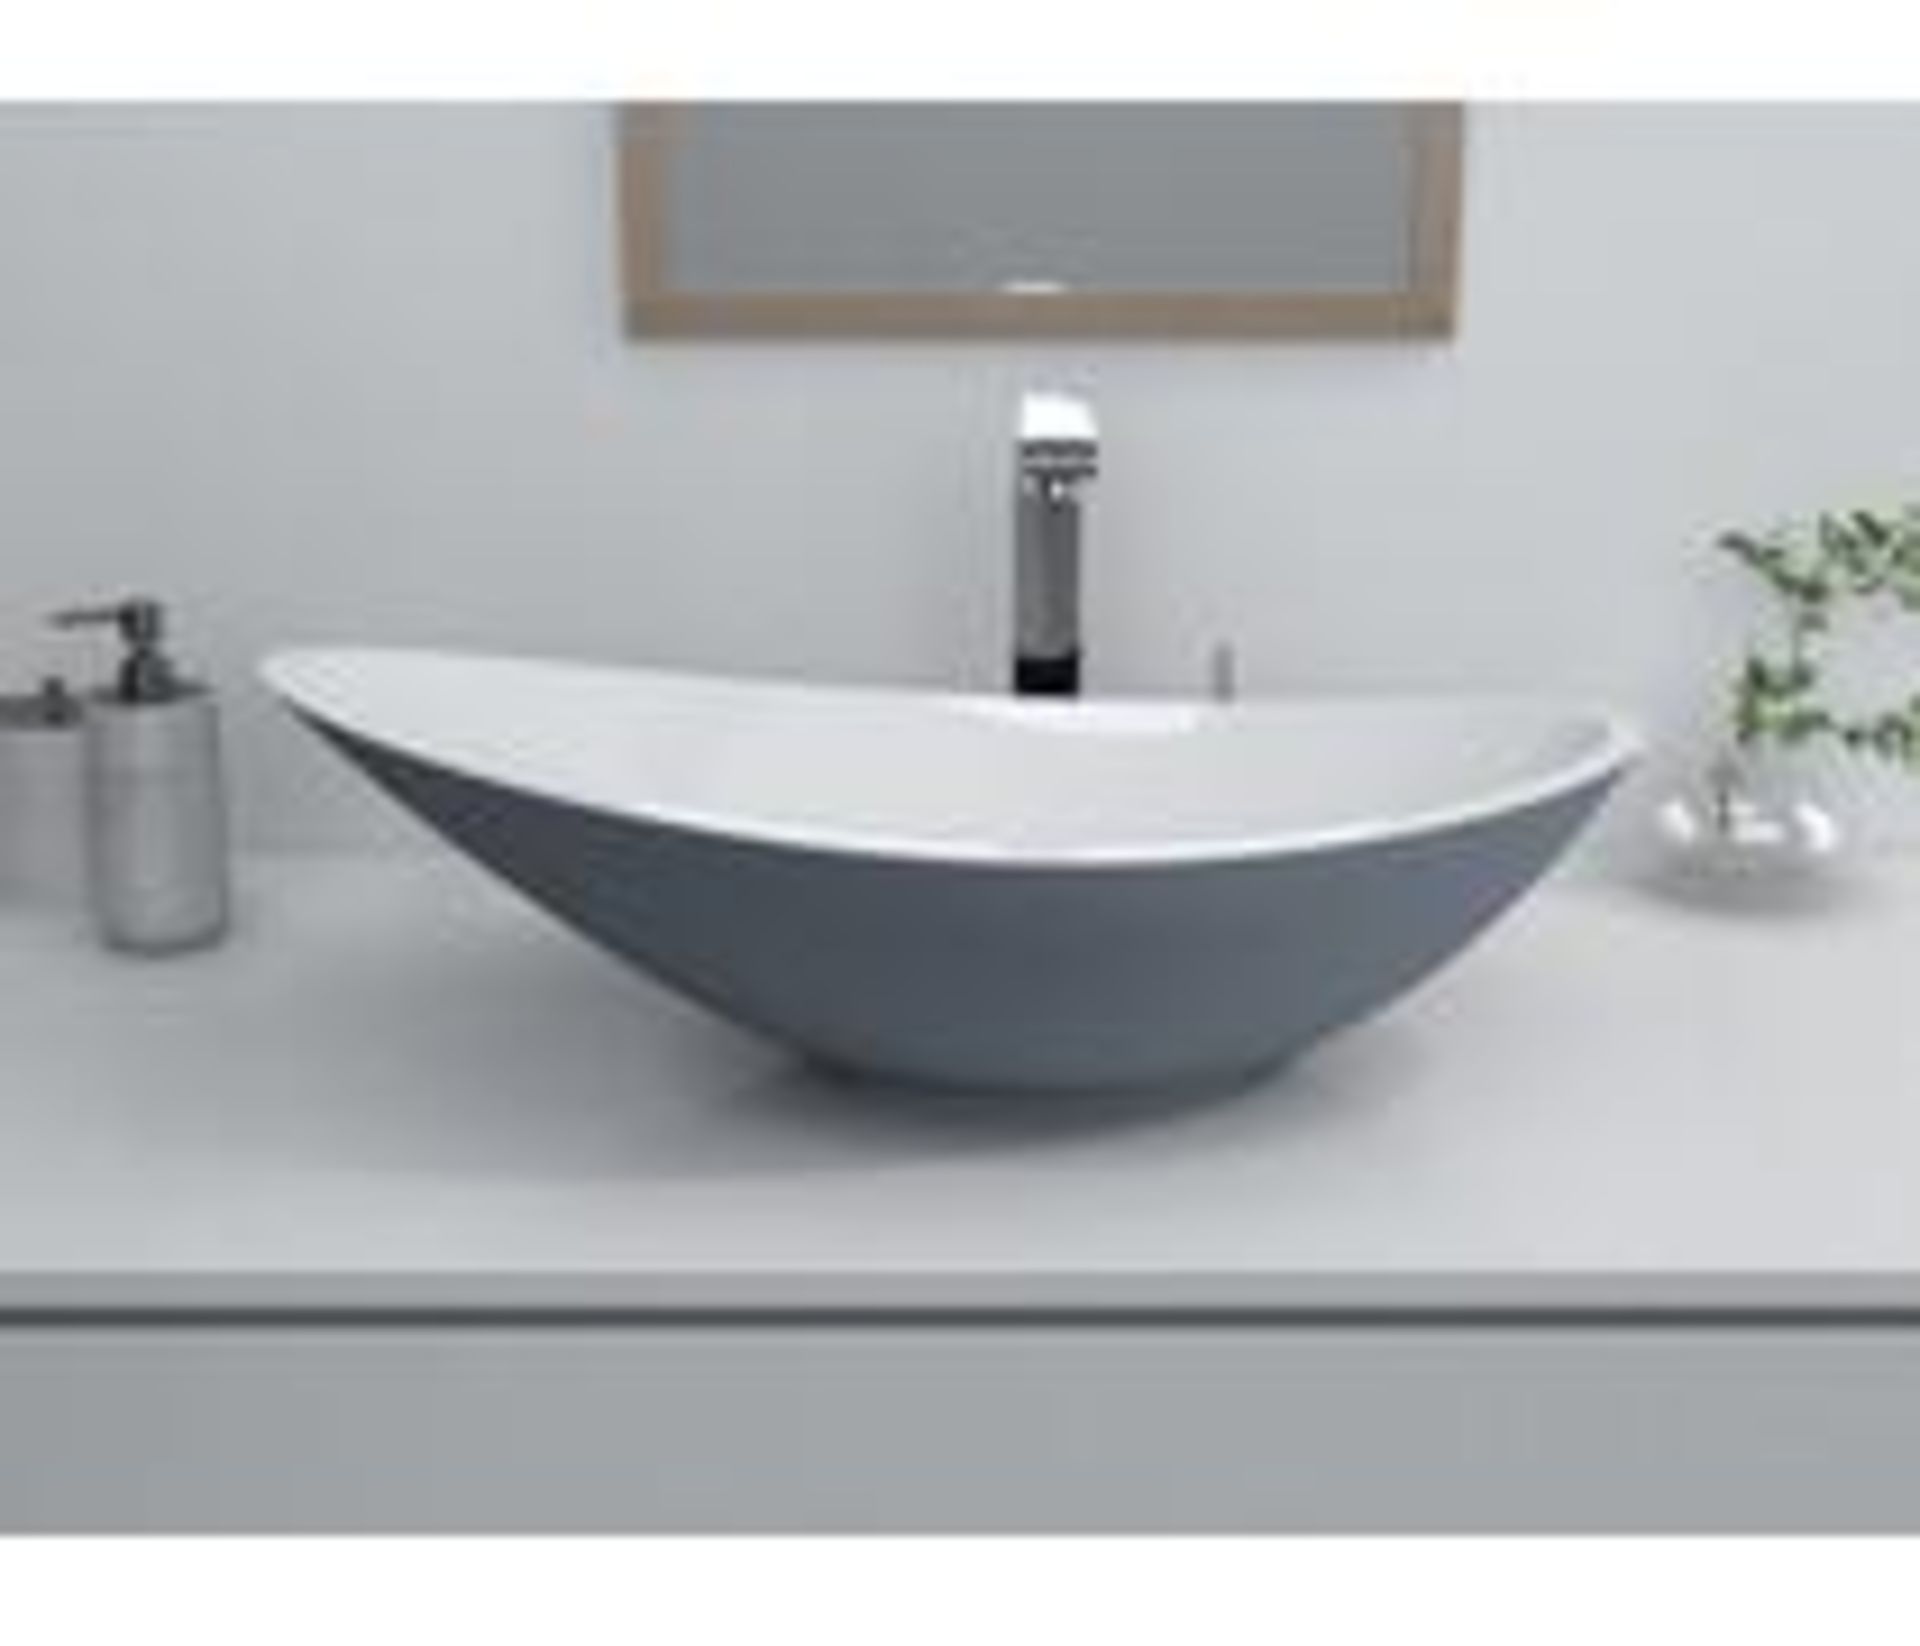 NEW (M106) Elemi 564x323mm Resin Basin and 800mm white Countertop. RRP £450.00. Includes: Cou... - Image 2 of 2